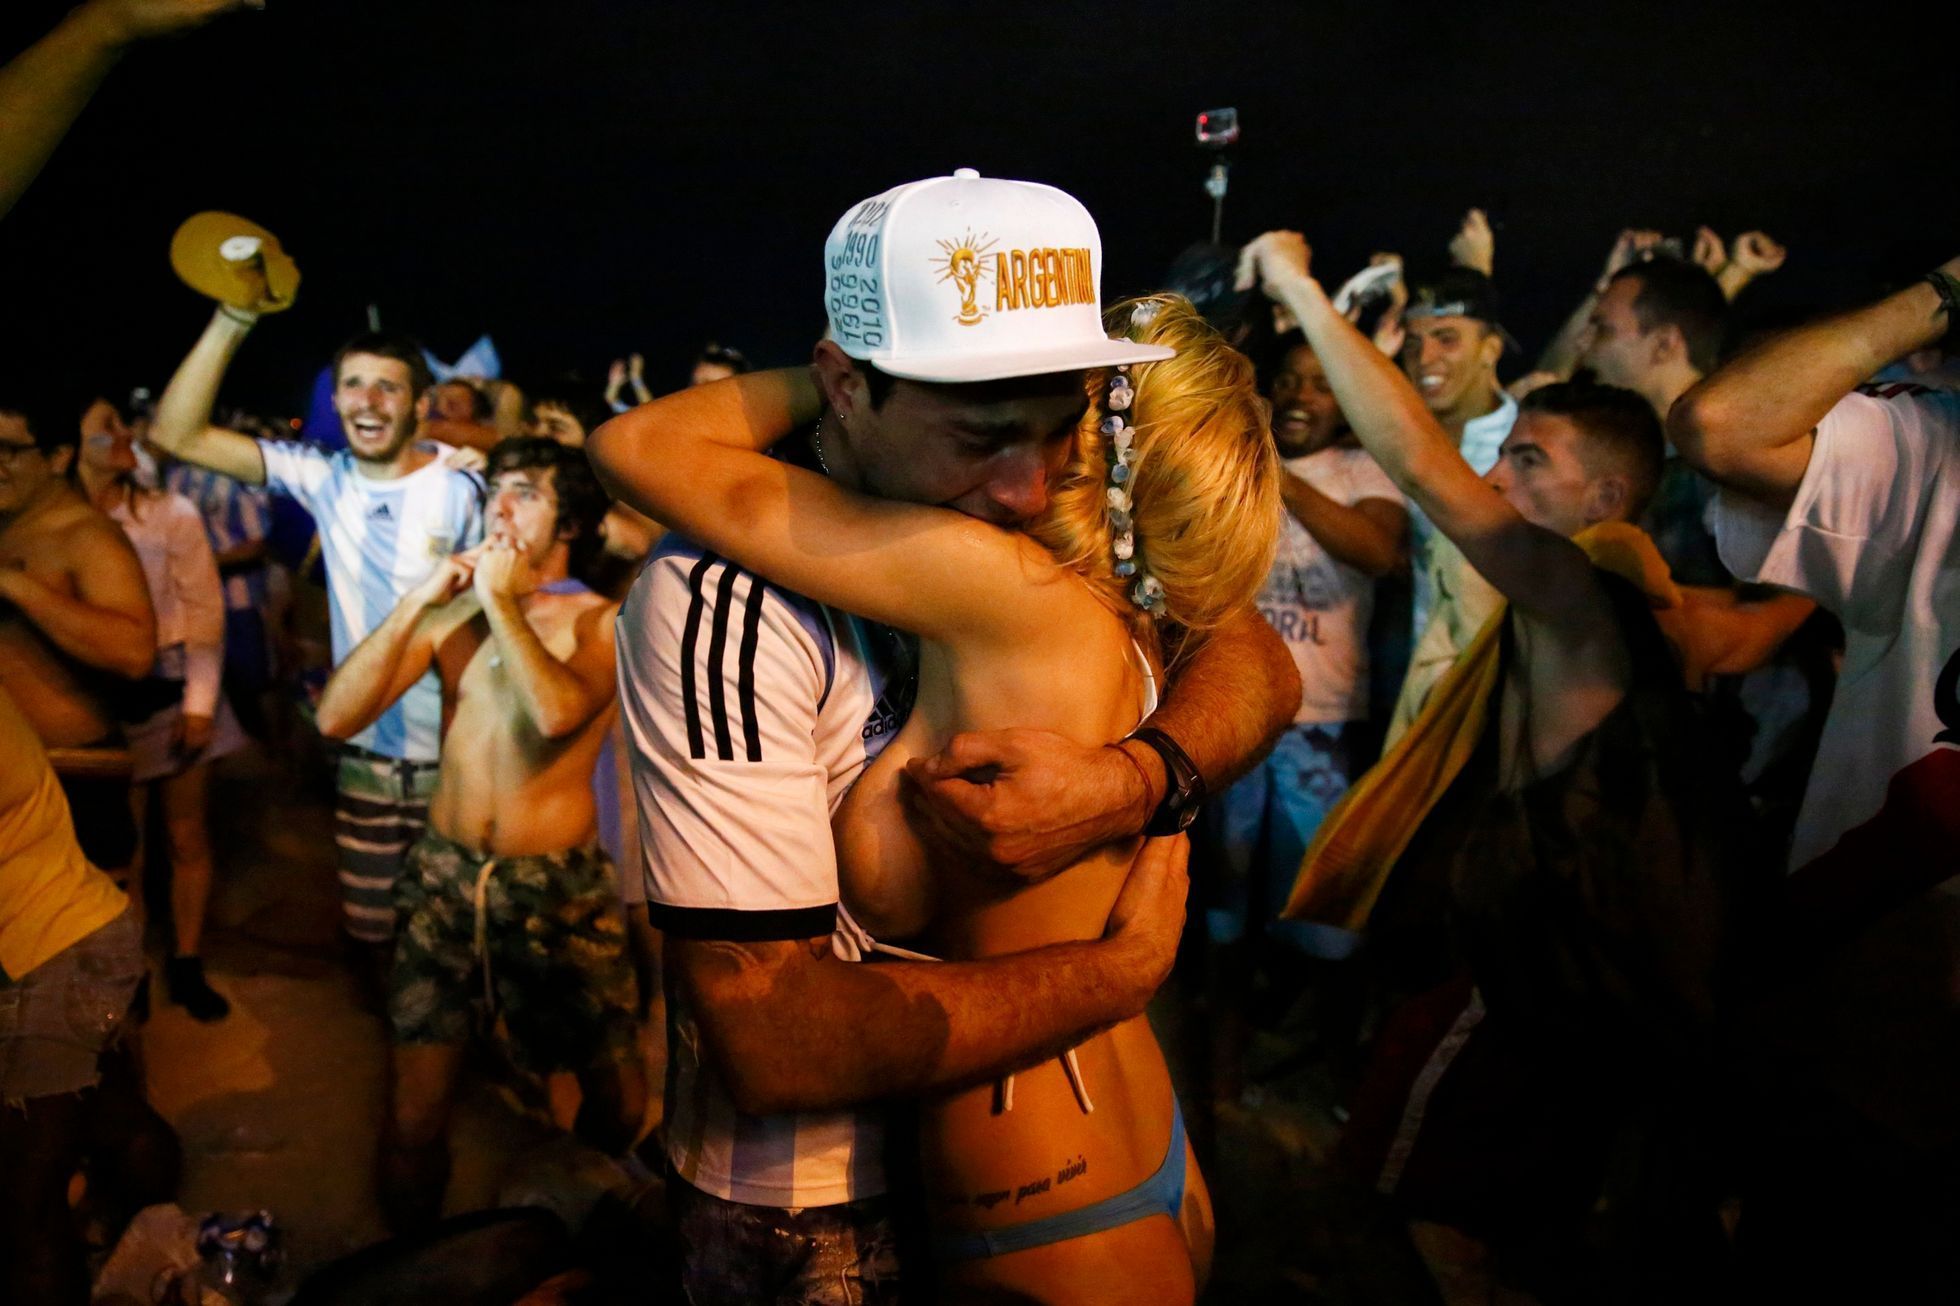 Argentina fans react after their team won the 2014 World Cup semi-final match against the Netherlands as they watched at Copacabana beach in Rio de Janeiro